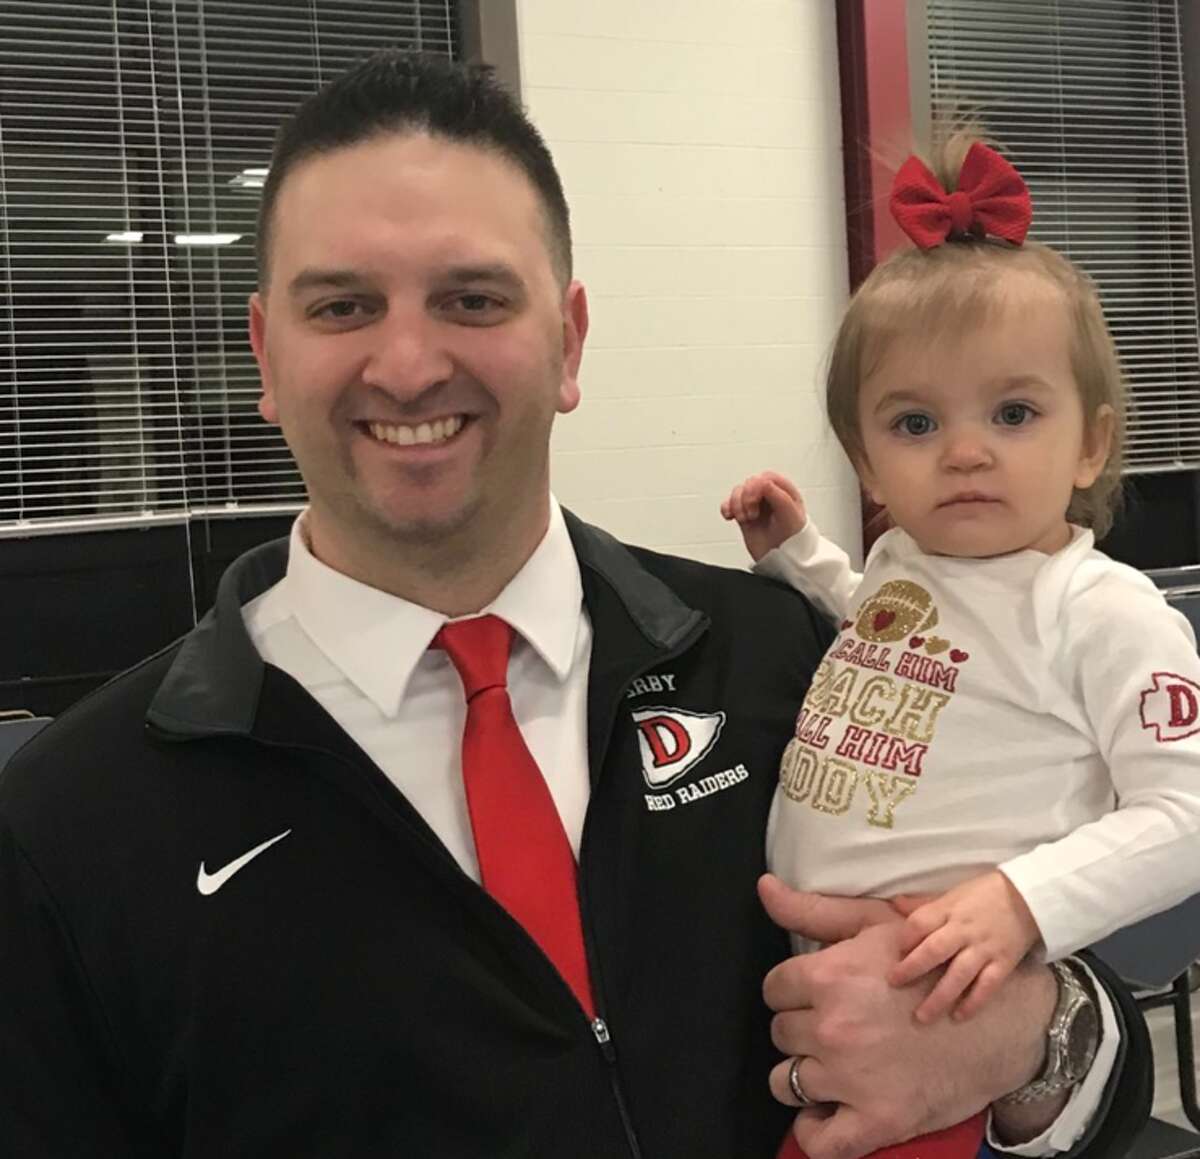 Derby’s Steve Bainer (with his daughter, Gabriella) will be both the school’s head baseball and football coach. (Photo via Steve Bainer)